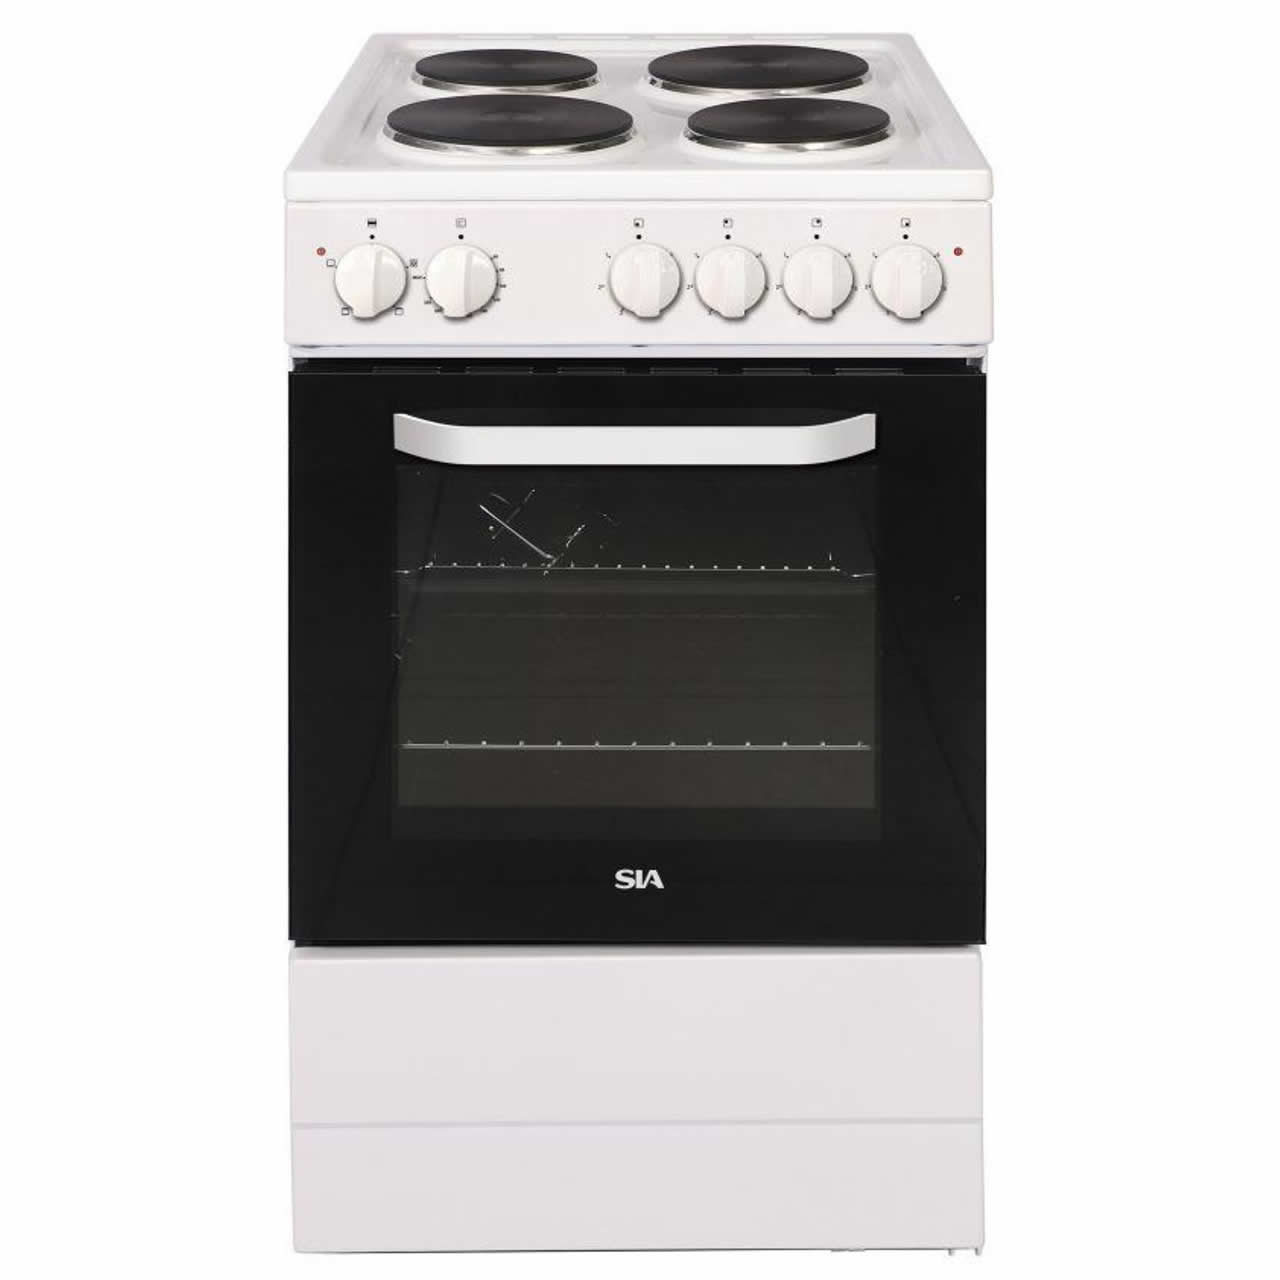 Sia 500mm Single Electric Cooker Solid Plate Hob White